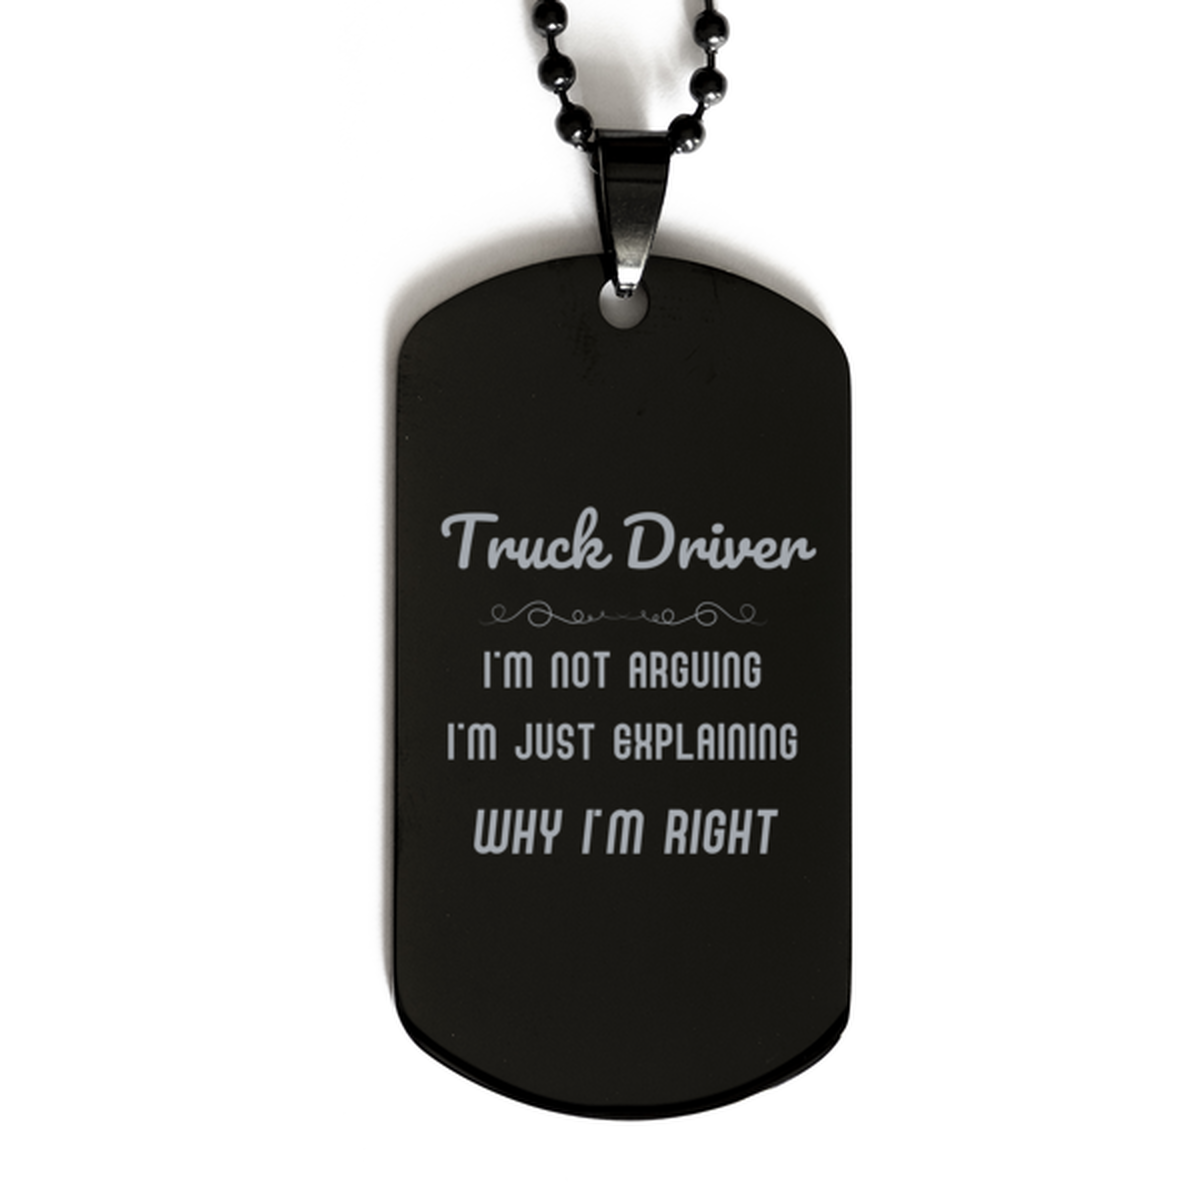 Truck Driver I'm not Arguing. I'm Just Explaining Why I'm RIGHT Black Dog Tag, Funny Saying Quote Truck Driver Gifts For Truck Driver Graduation Birthday Christmas Gifts for Men Women Coworker